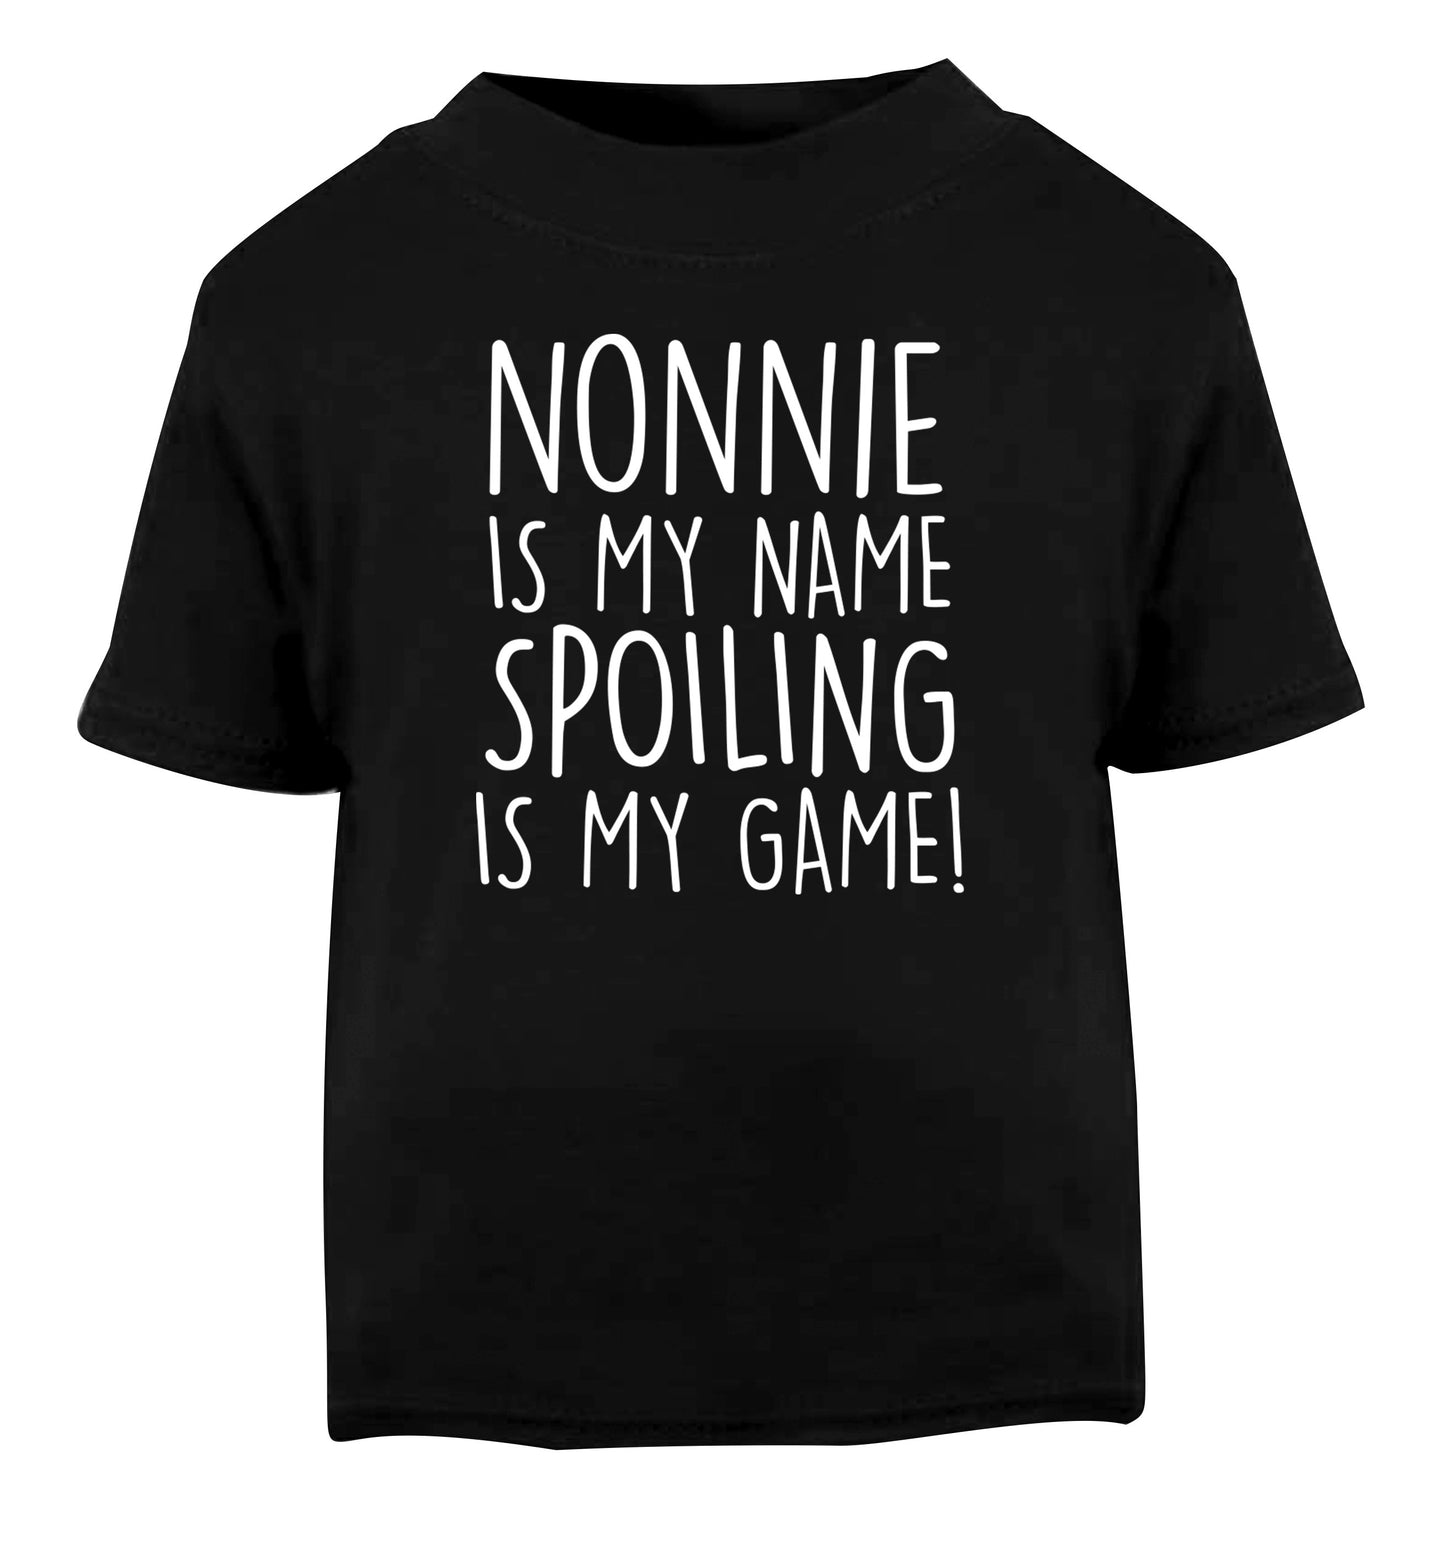 Nonnie is my name, spoiling is my game Black Baby Toddler Tshirt 2 years